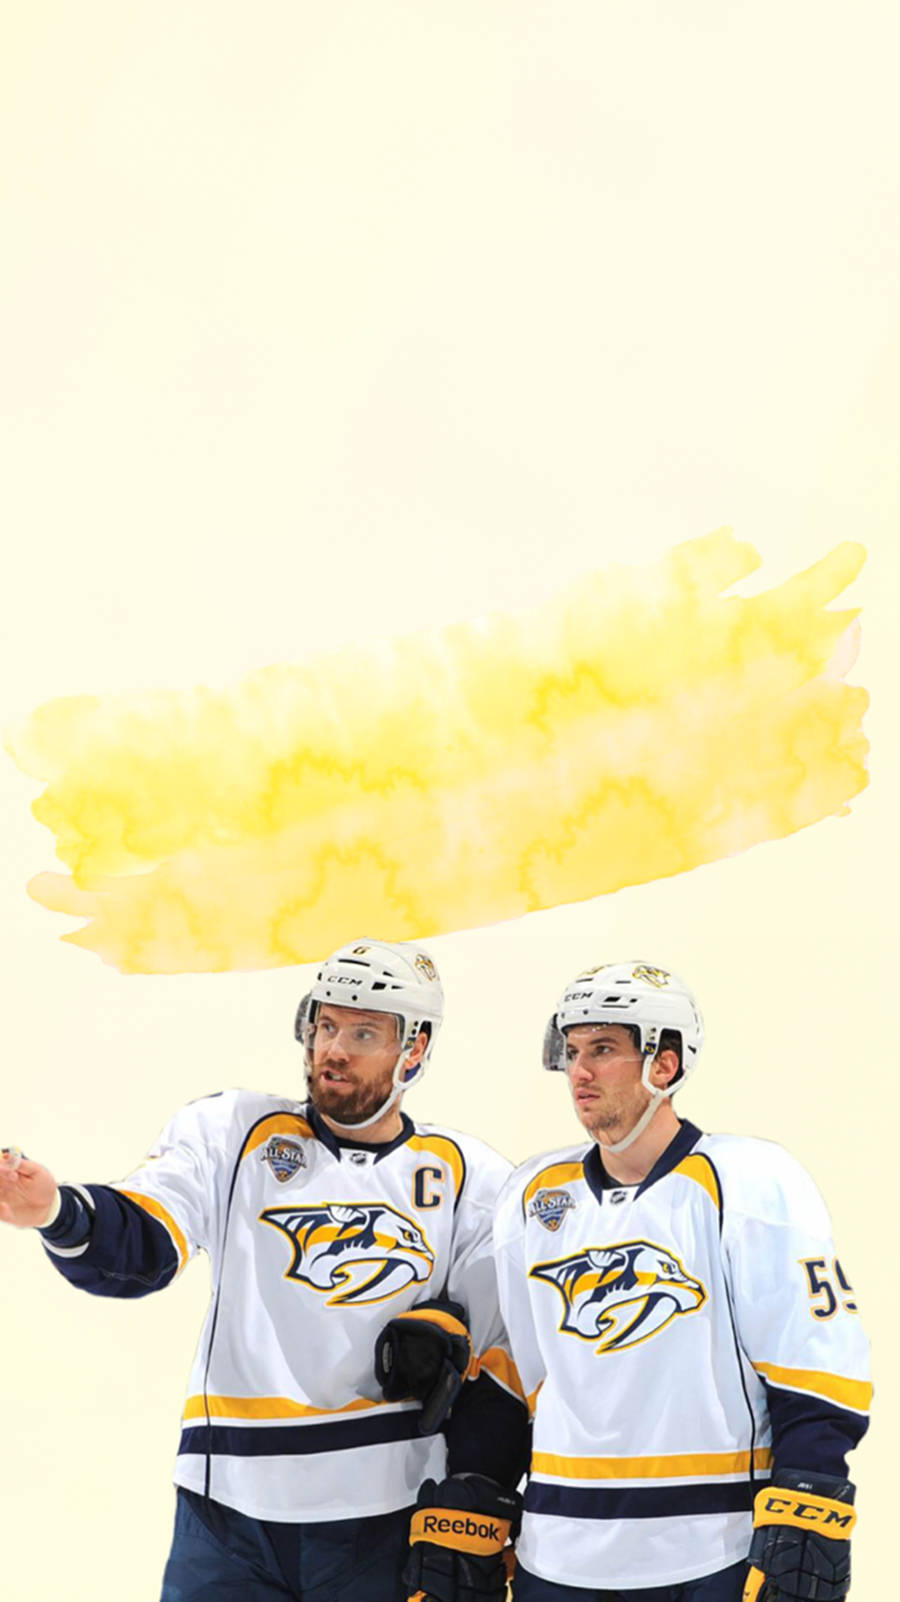 NHL Stars Roman Josi and Mike Fisher in Action Wallpaper